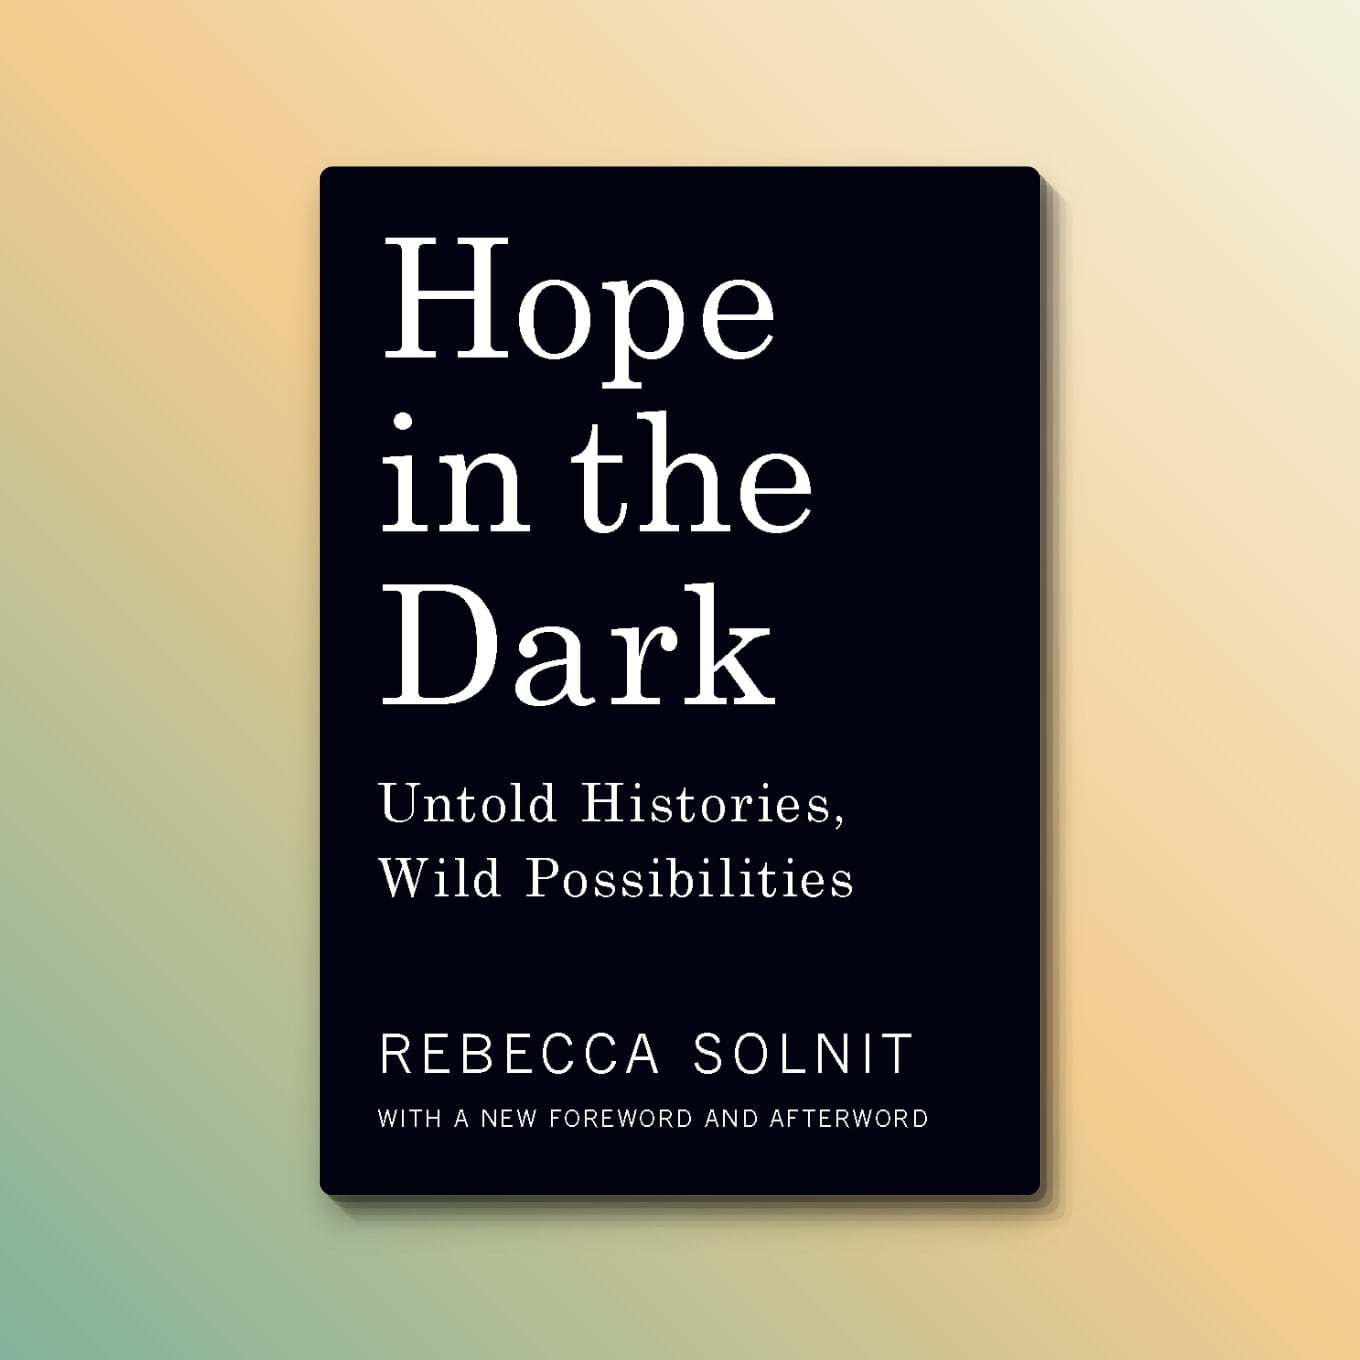 “Hope in the Dark: Untold Histories, Wild Possibilities” by Rebecca Solnit